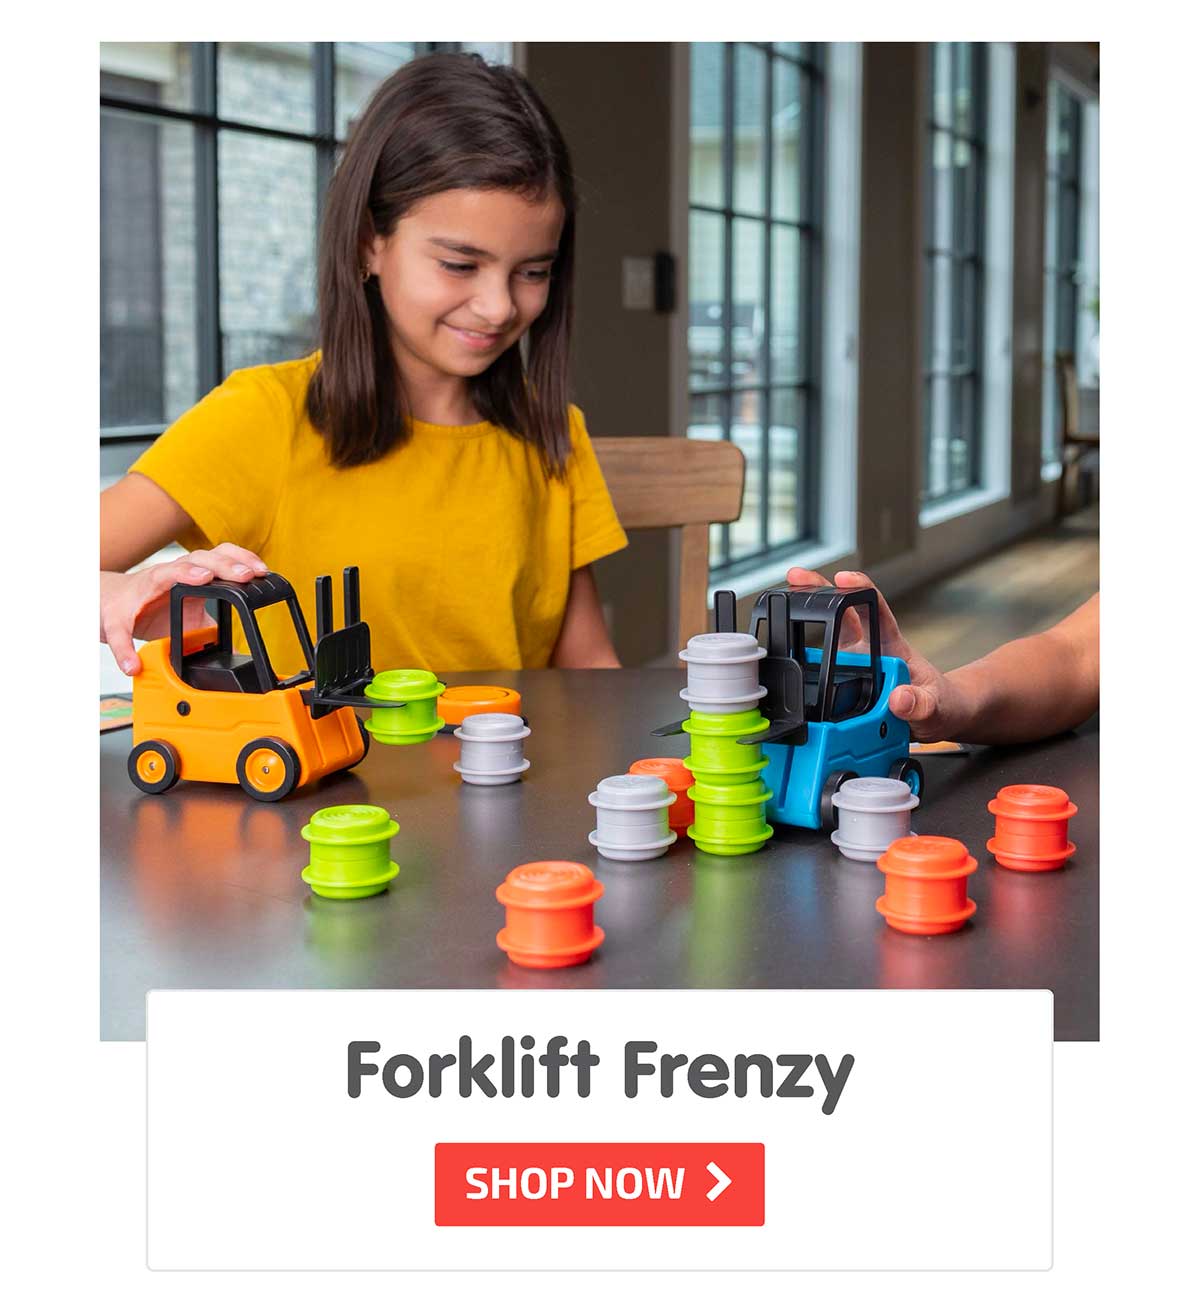 ABOUT US Forkliftfrenzy, forklift frenzy 